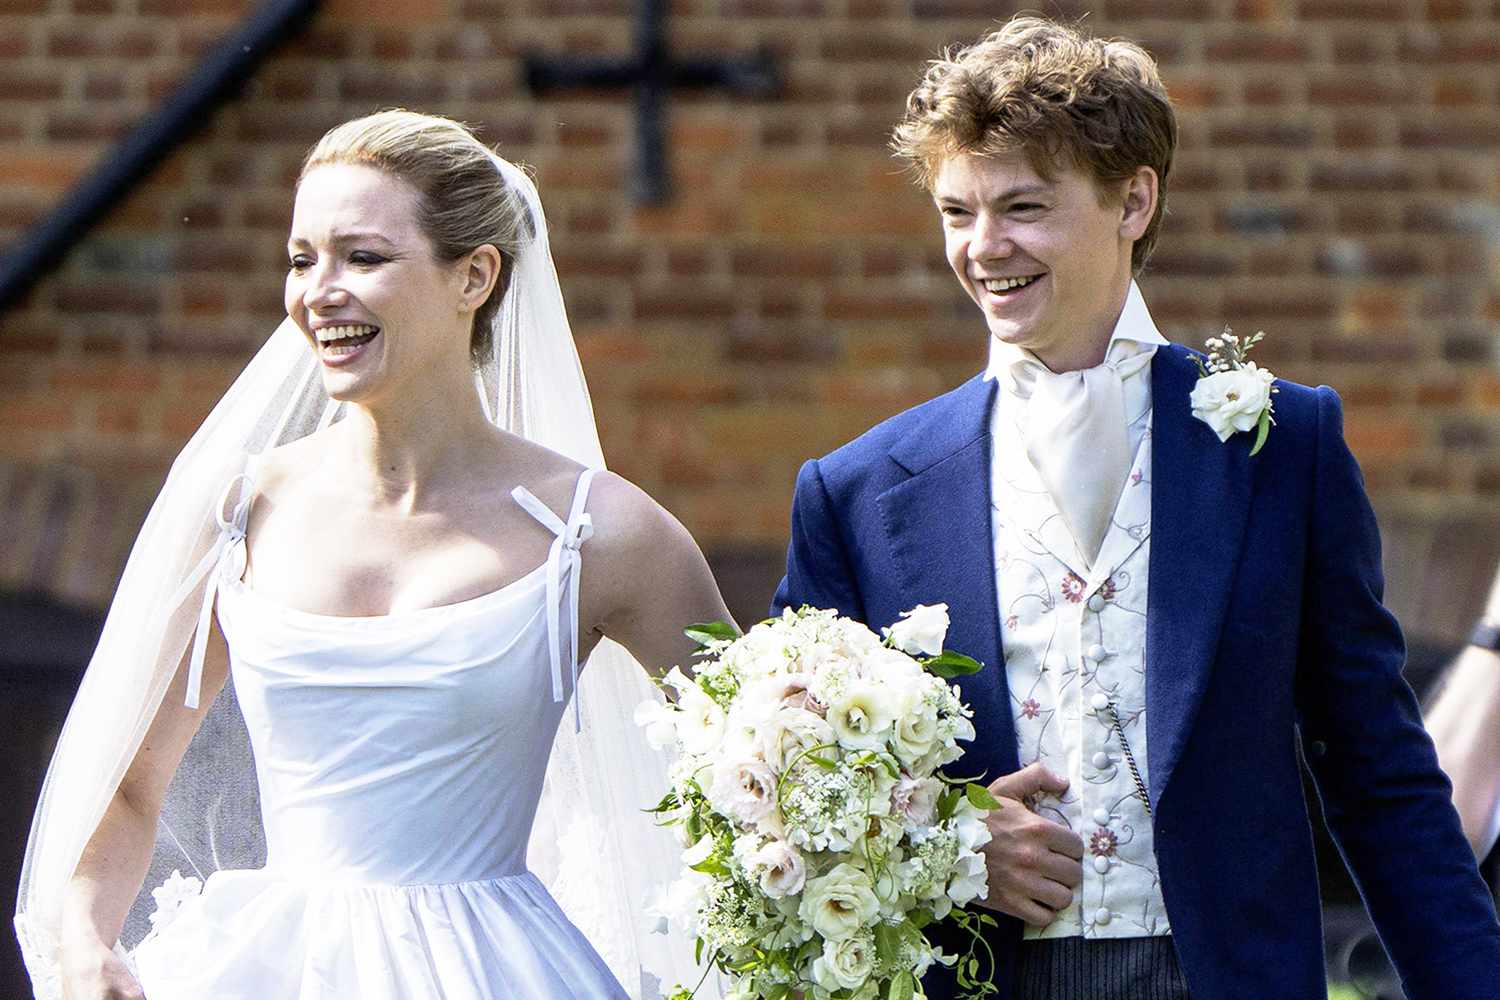 “Love Actually” Star Thomas Brodie-Sangster Marries Actress Talulah Riley in England — with a Horse as Bridesmaid!